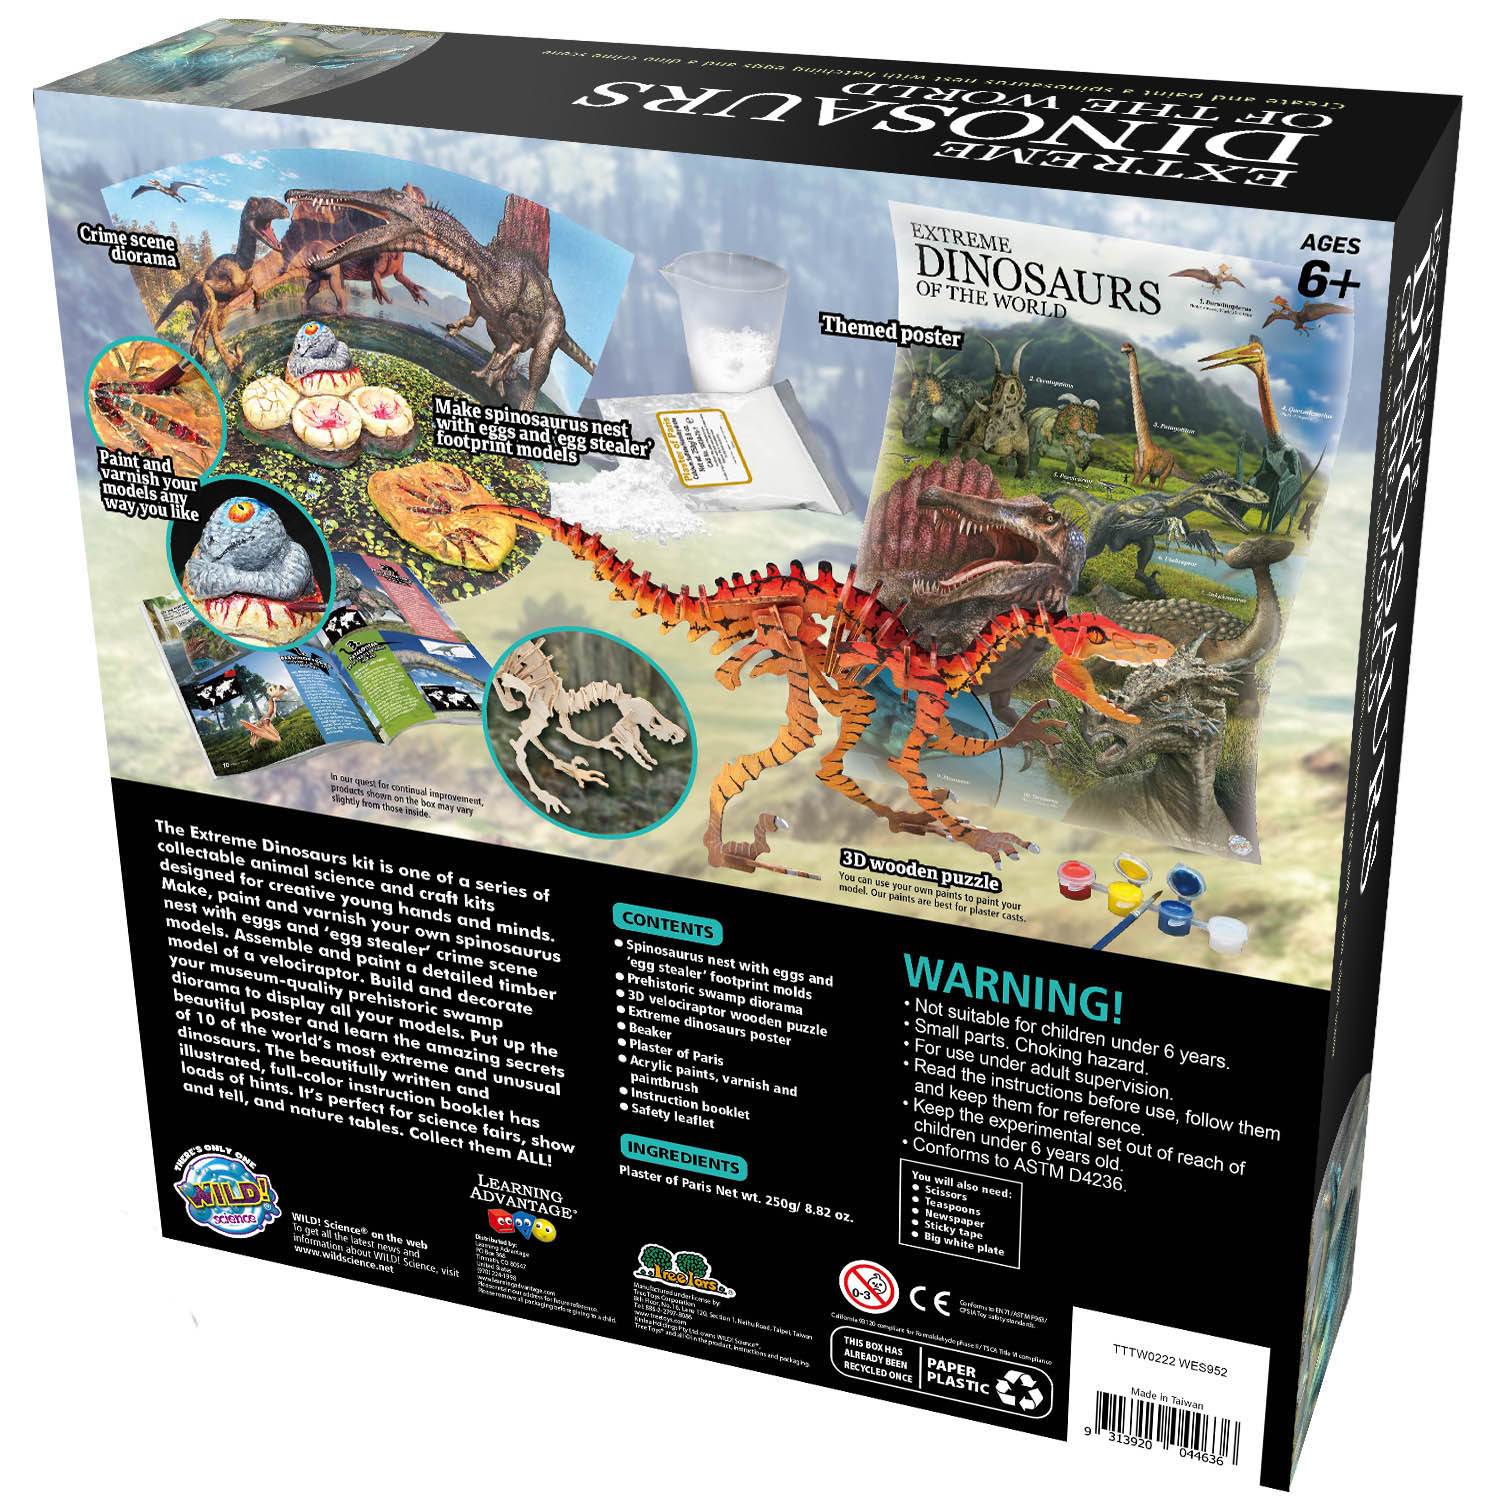 WILD ENVIRONMENTAL SCIENCE Extreme Dinosaurs of the World - For Ages 6+ - Create and Customize Models and Dioramas - Study the Most Extreme Dinosaurs image number null